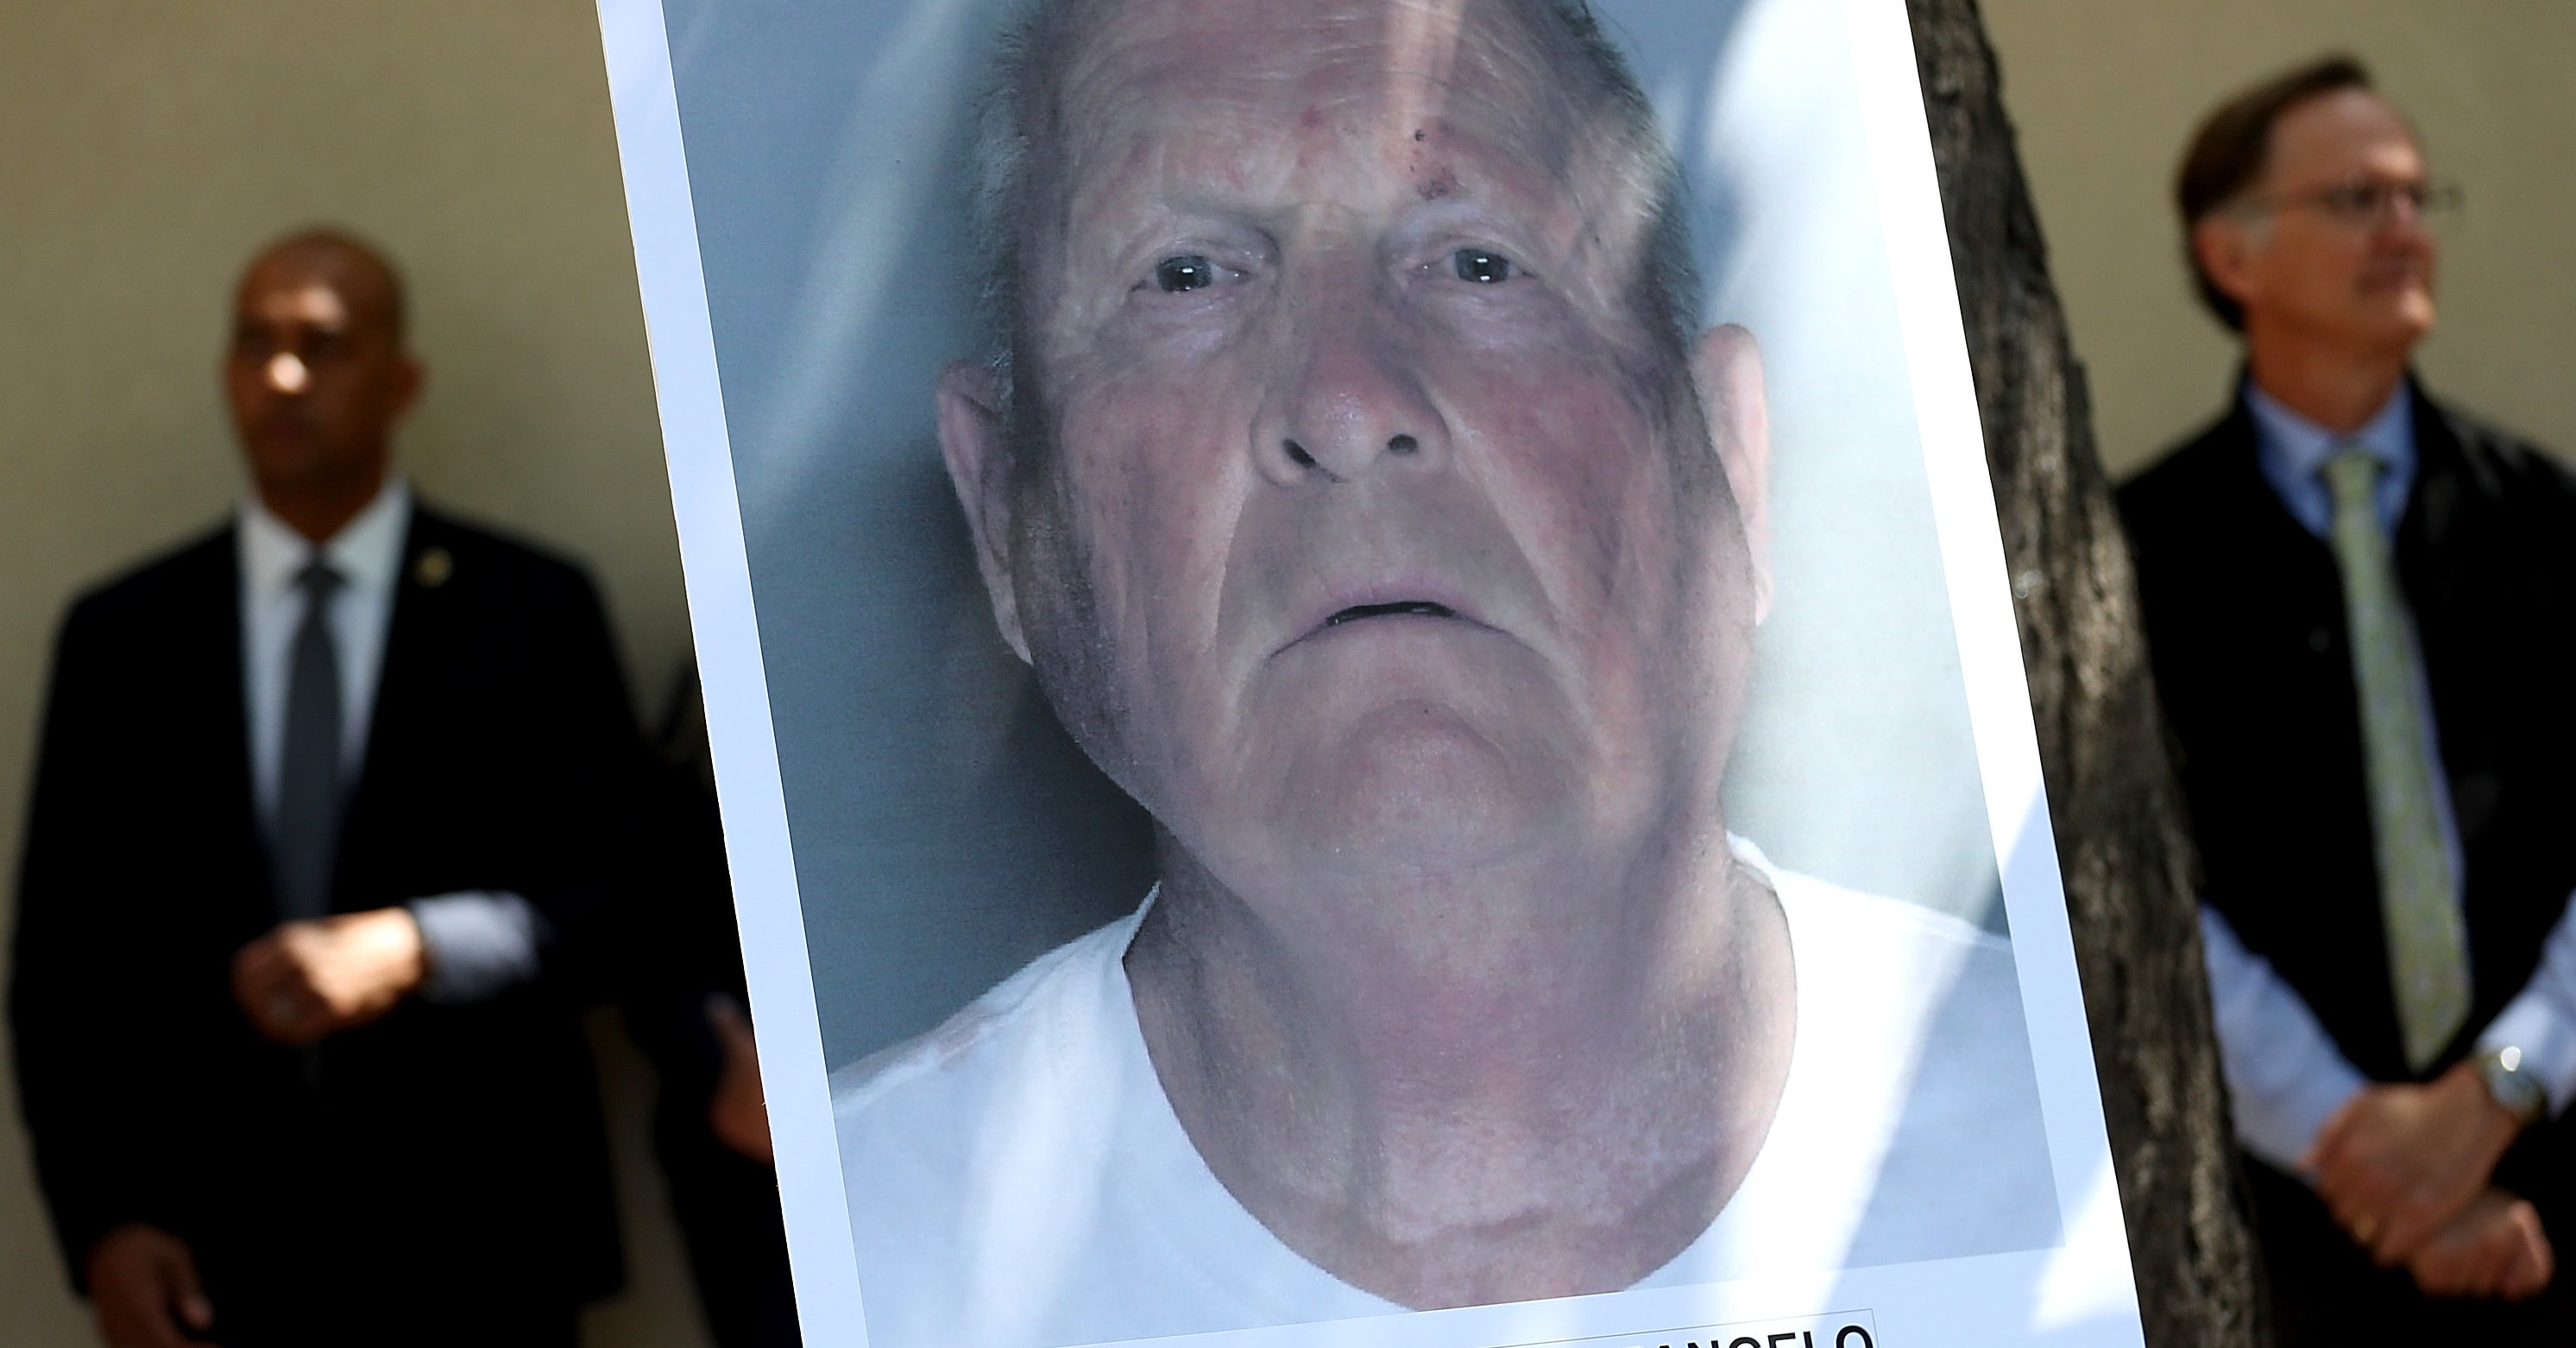 The Genealogy Website That Helped Crack The Golden State Killer Case Has Been Bought By A Forensic Genetics Firm